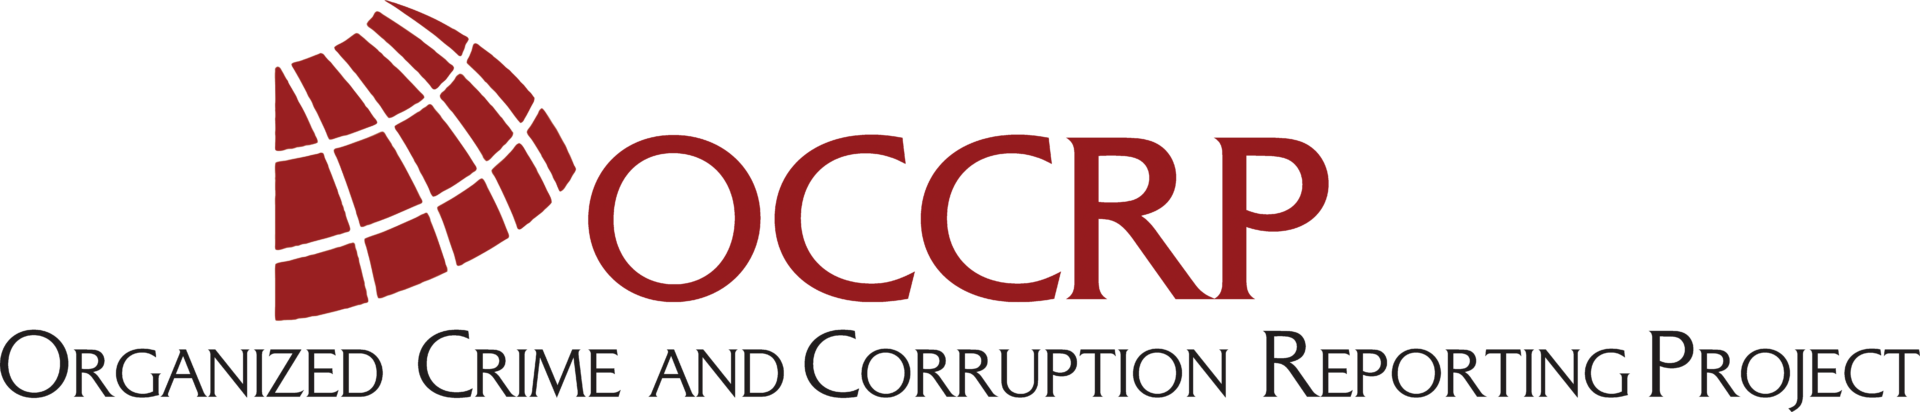 Organized Crime And Corruption Reporting Project Occrp Gfmd